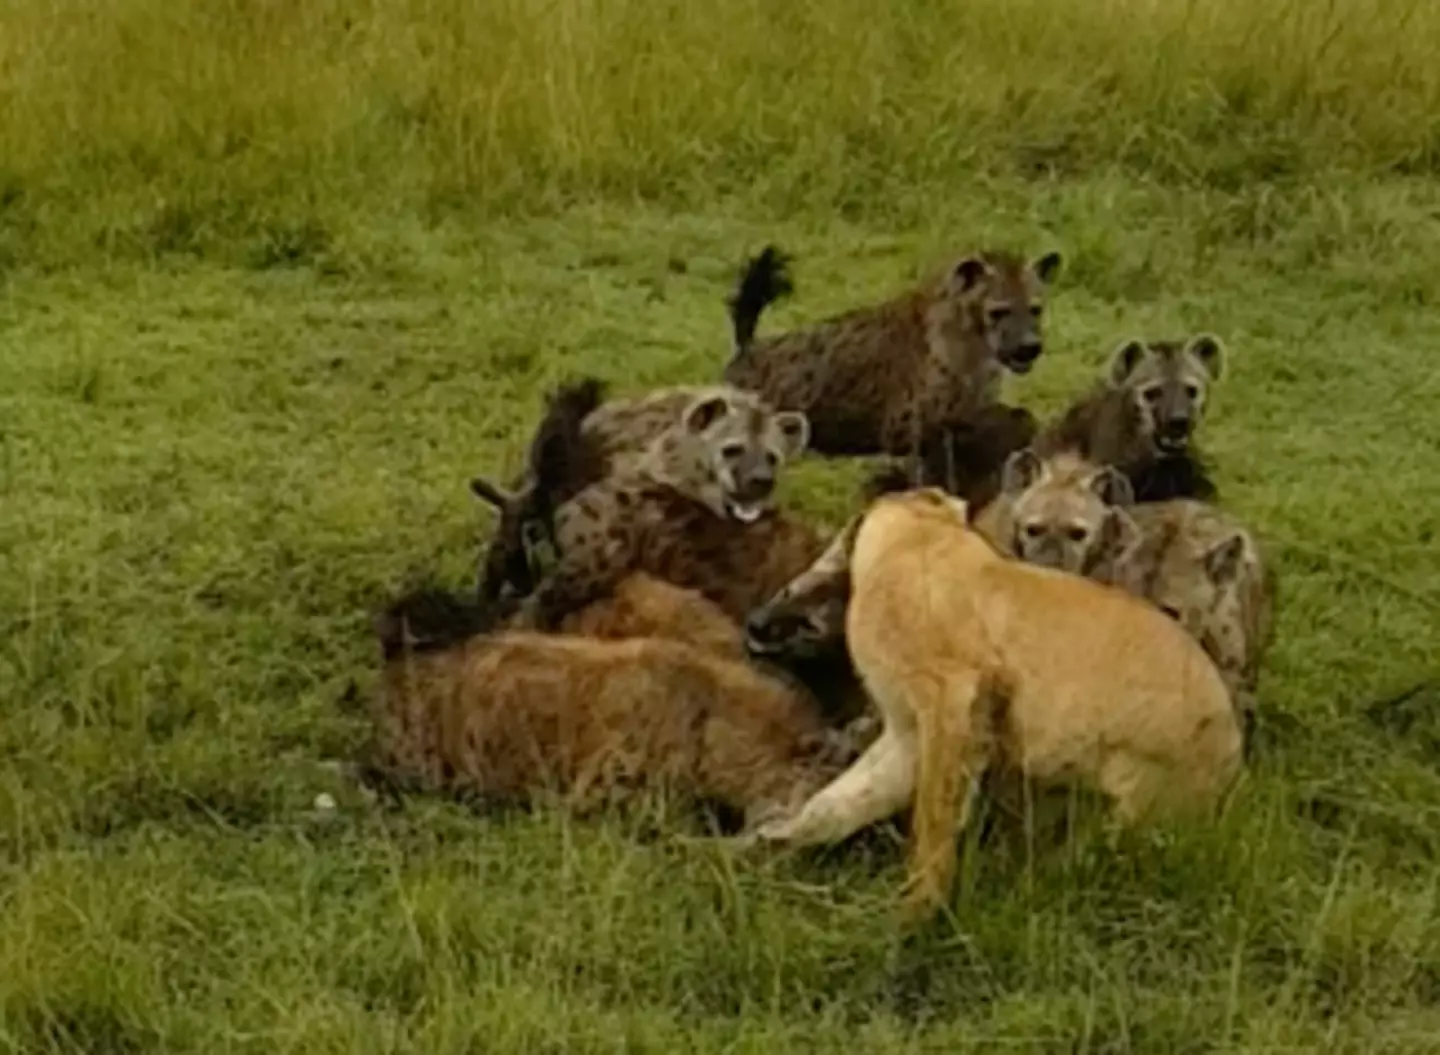 The hyenas quickly overpowered the lioness.